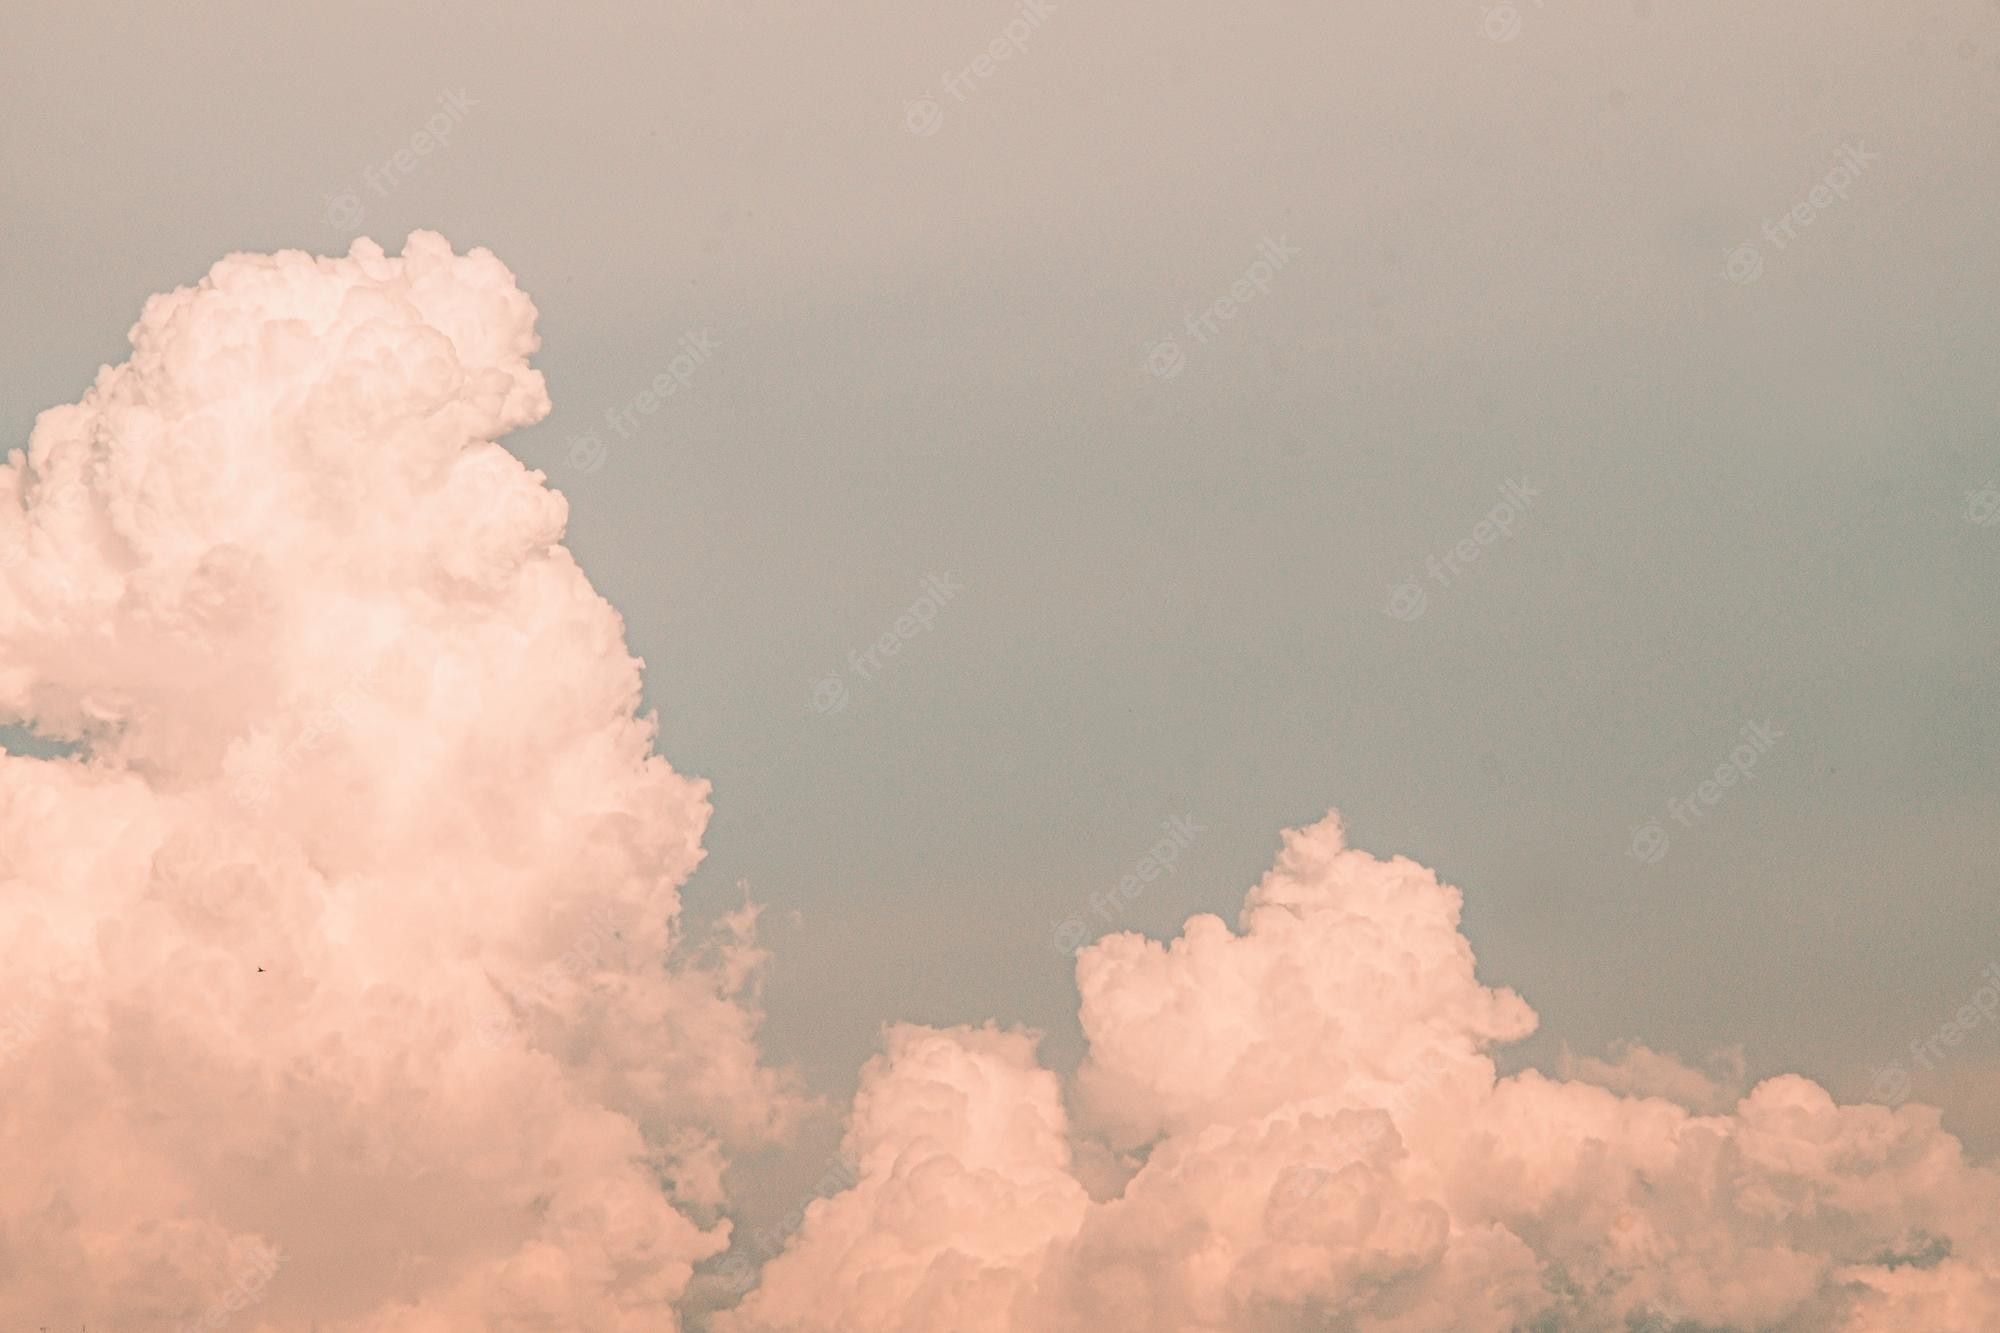 A sky with clouds - Vintage clouds, cloud